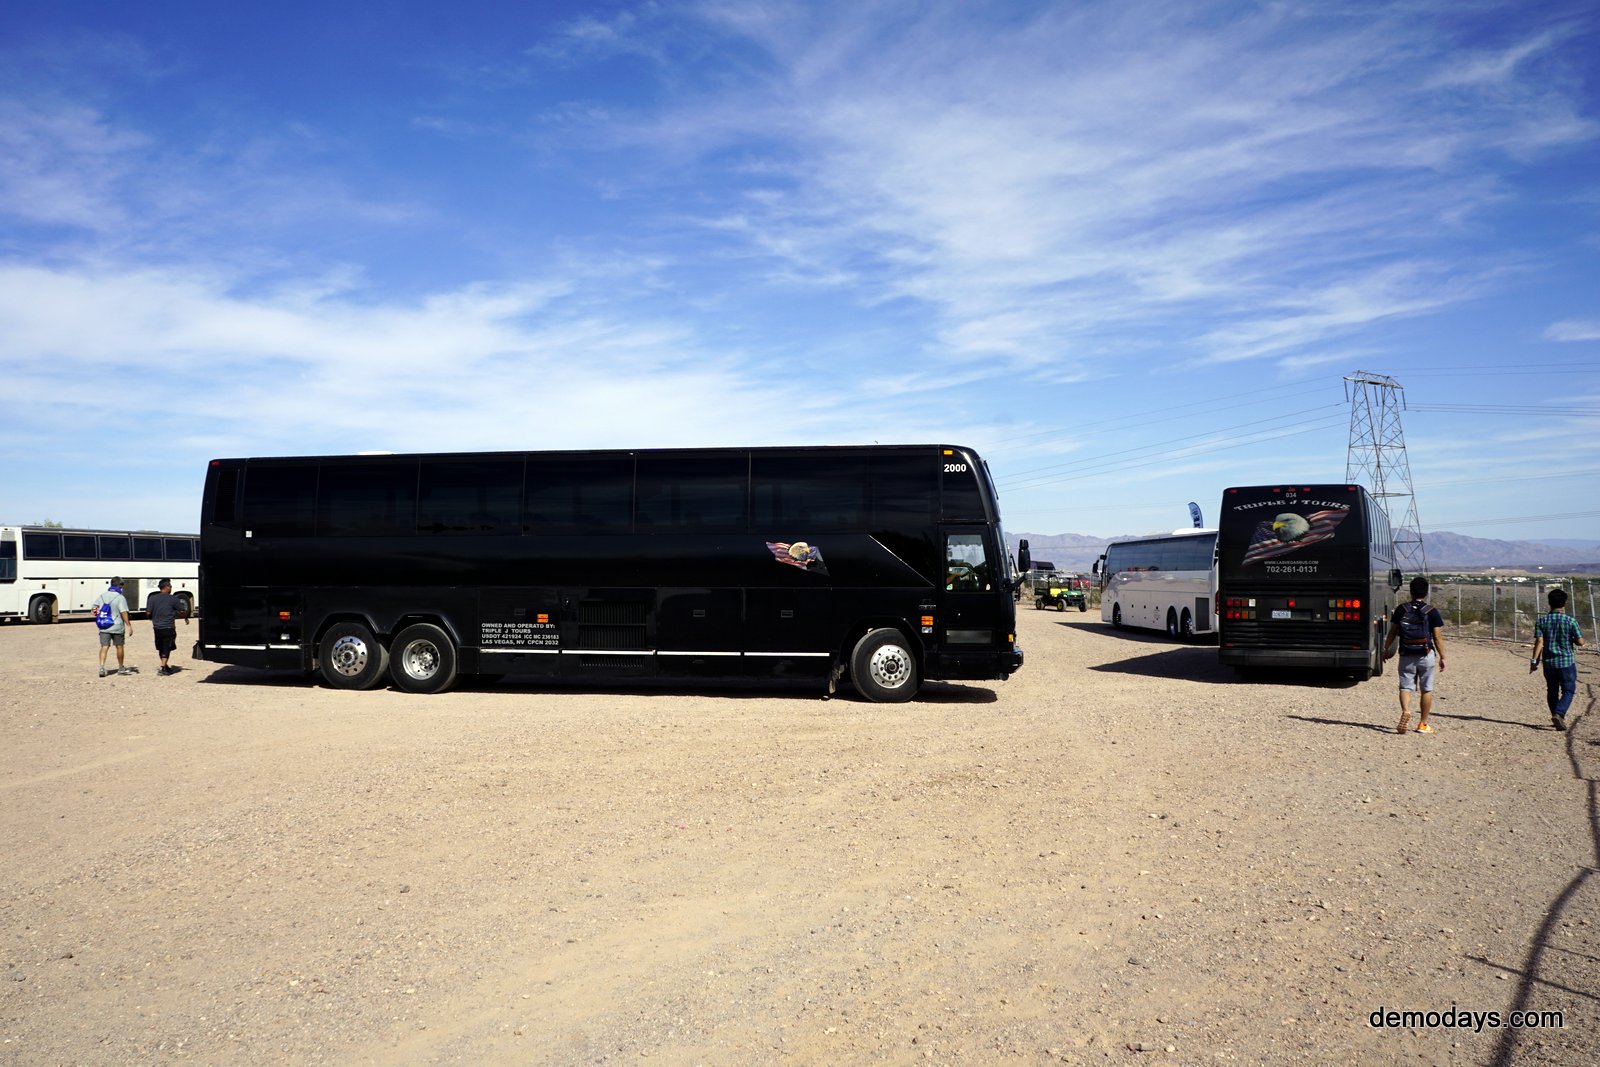 Outdoor Demo Attendees Leave on Buses Back to Vegas